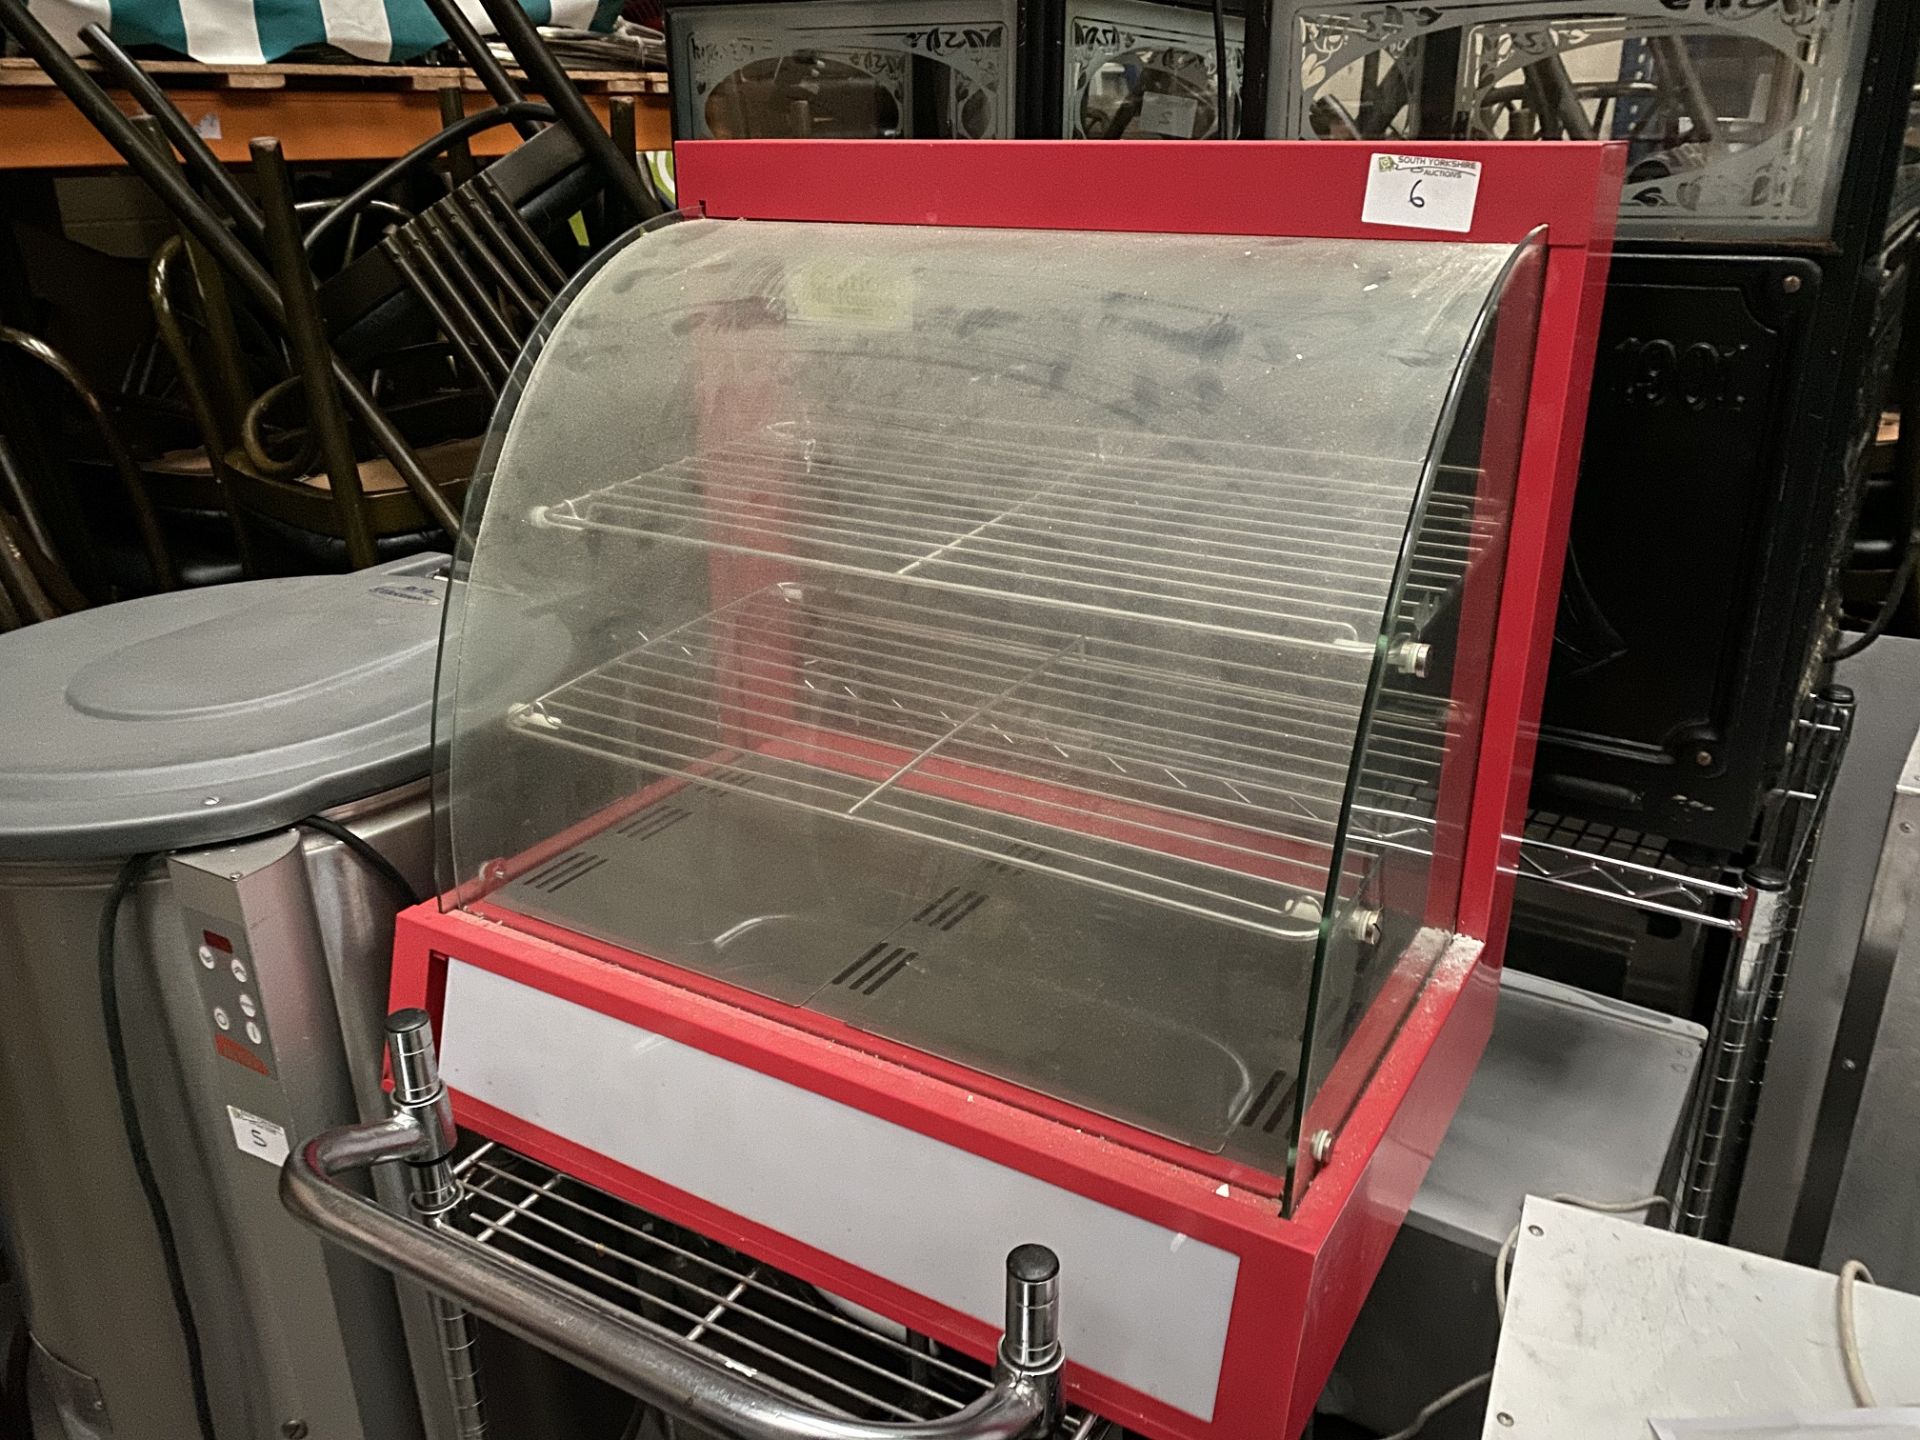 Heated Red Display Unit